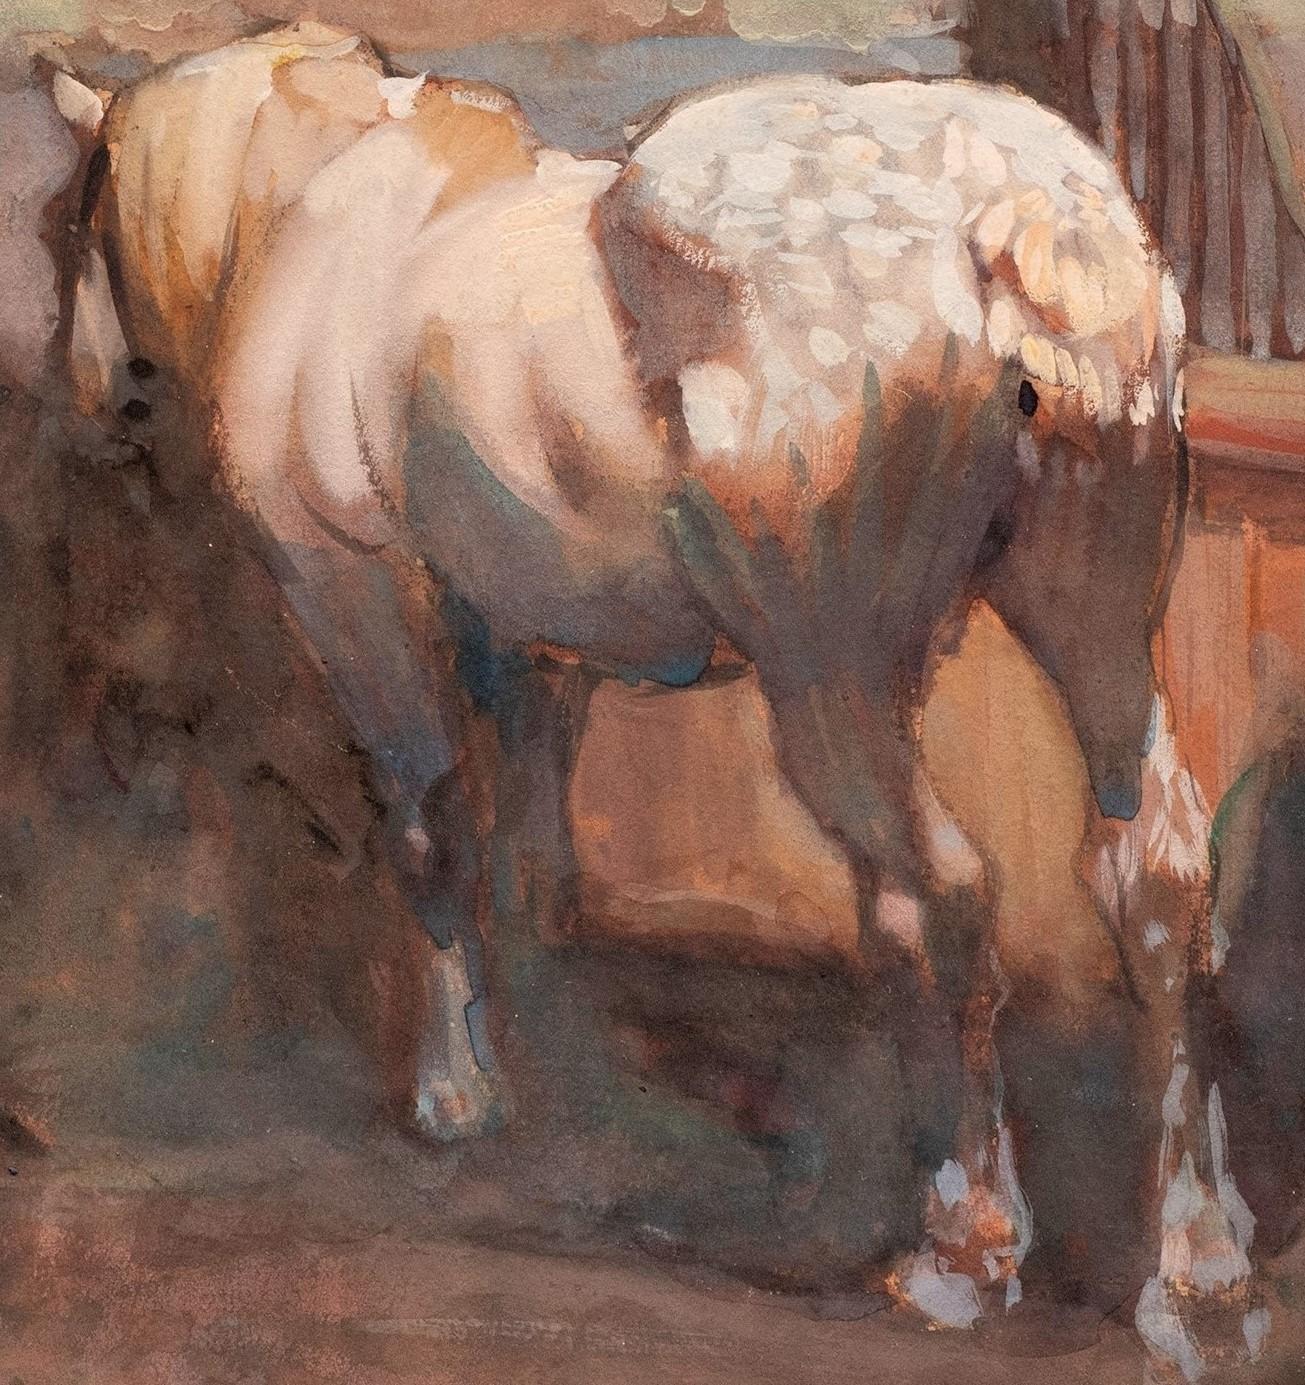 Antique Horse Painting
“Dapple Horse in its Stall”
Julius Paul Junghanns (German, 1876-1958)
Watercolor, gouache, paper
10 7/8 x 8 1/2 (18 x 5 1/4 frame) inches 
Signed lower left center and lower right

For a watercolor, this study of a dapple is